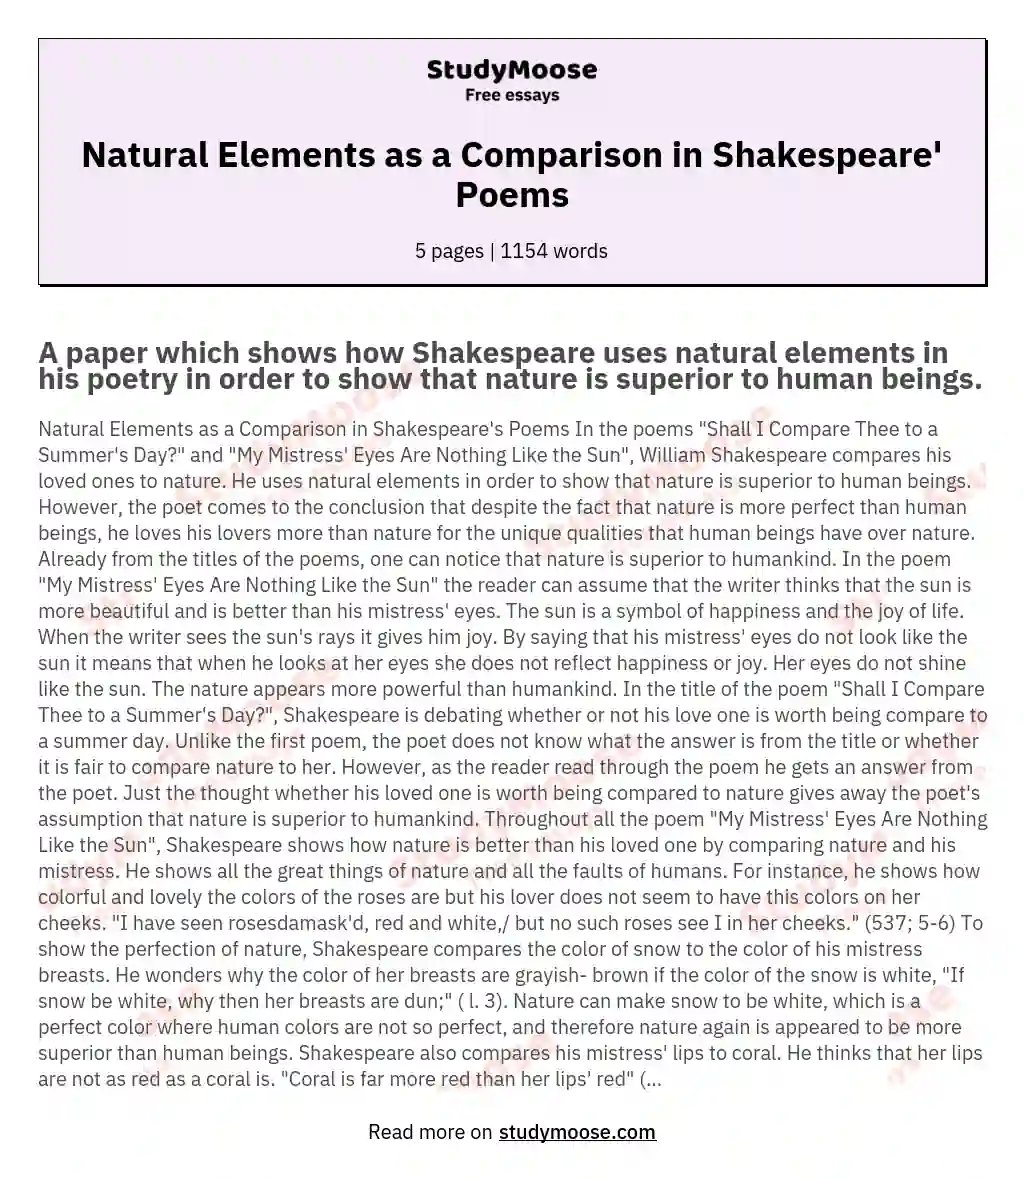 Natural Elements as a Comparison in Shakespeare' Poems essay